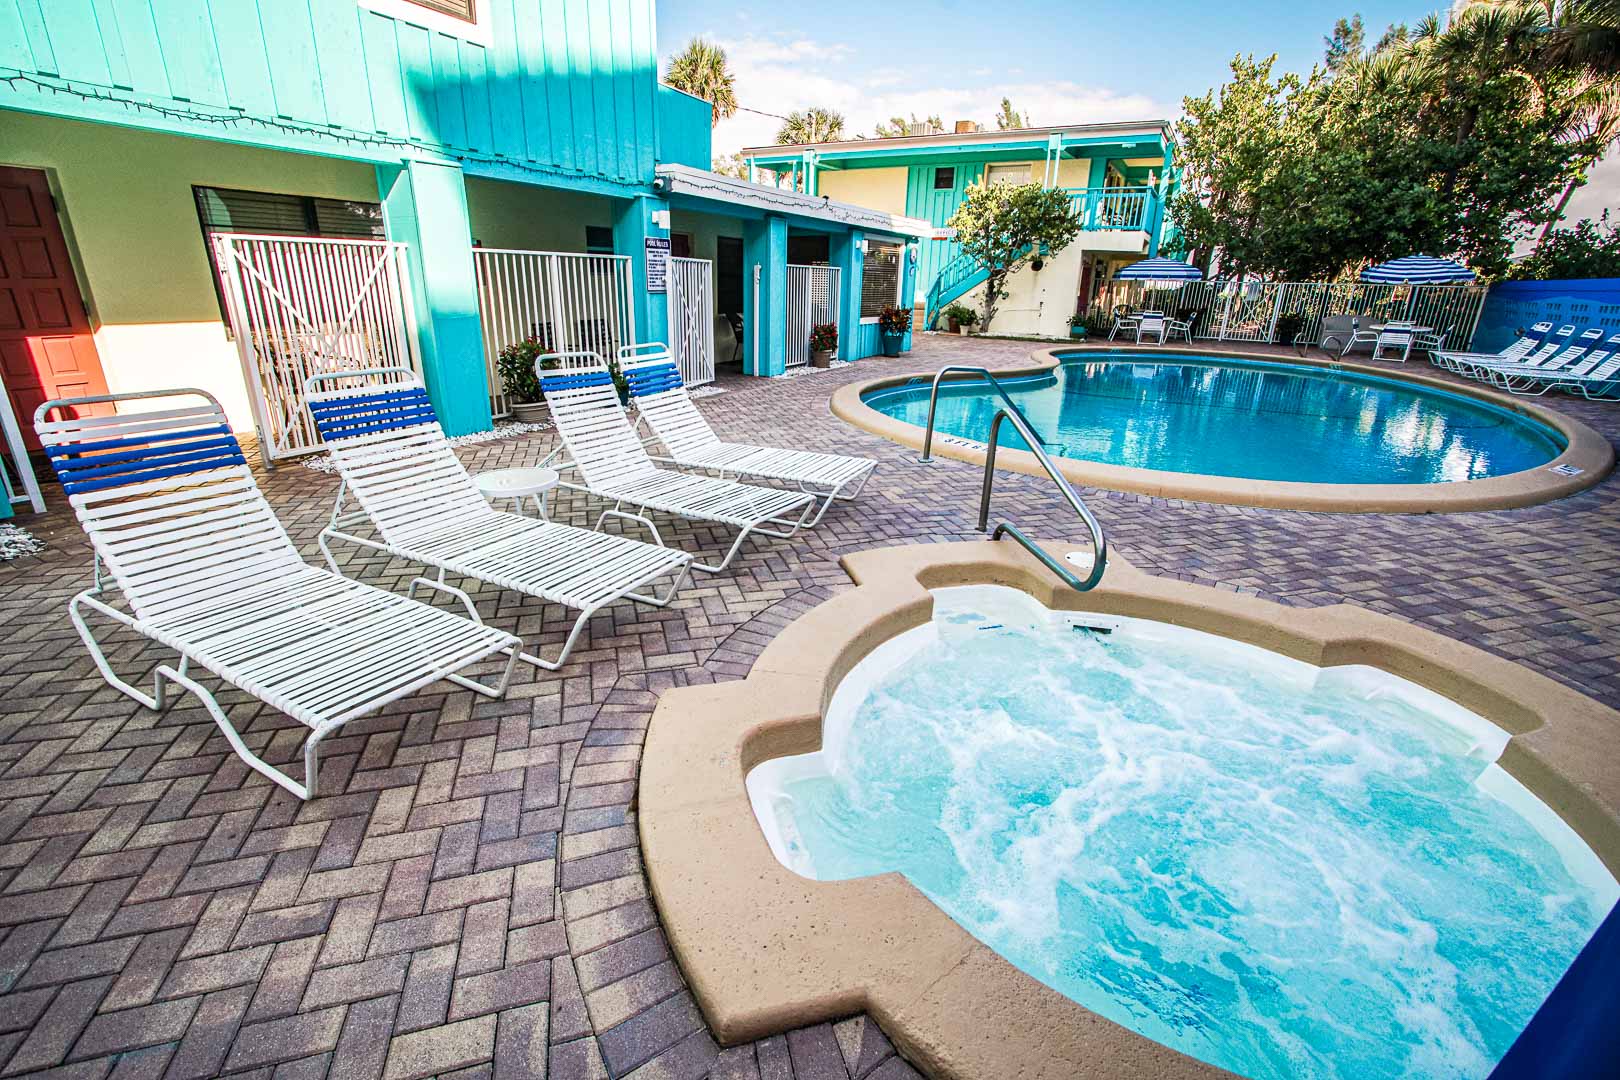 A colorful outdoor swimming pool and jacuzzi at VRI's Sand Dune Shores in Florida.